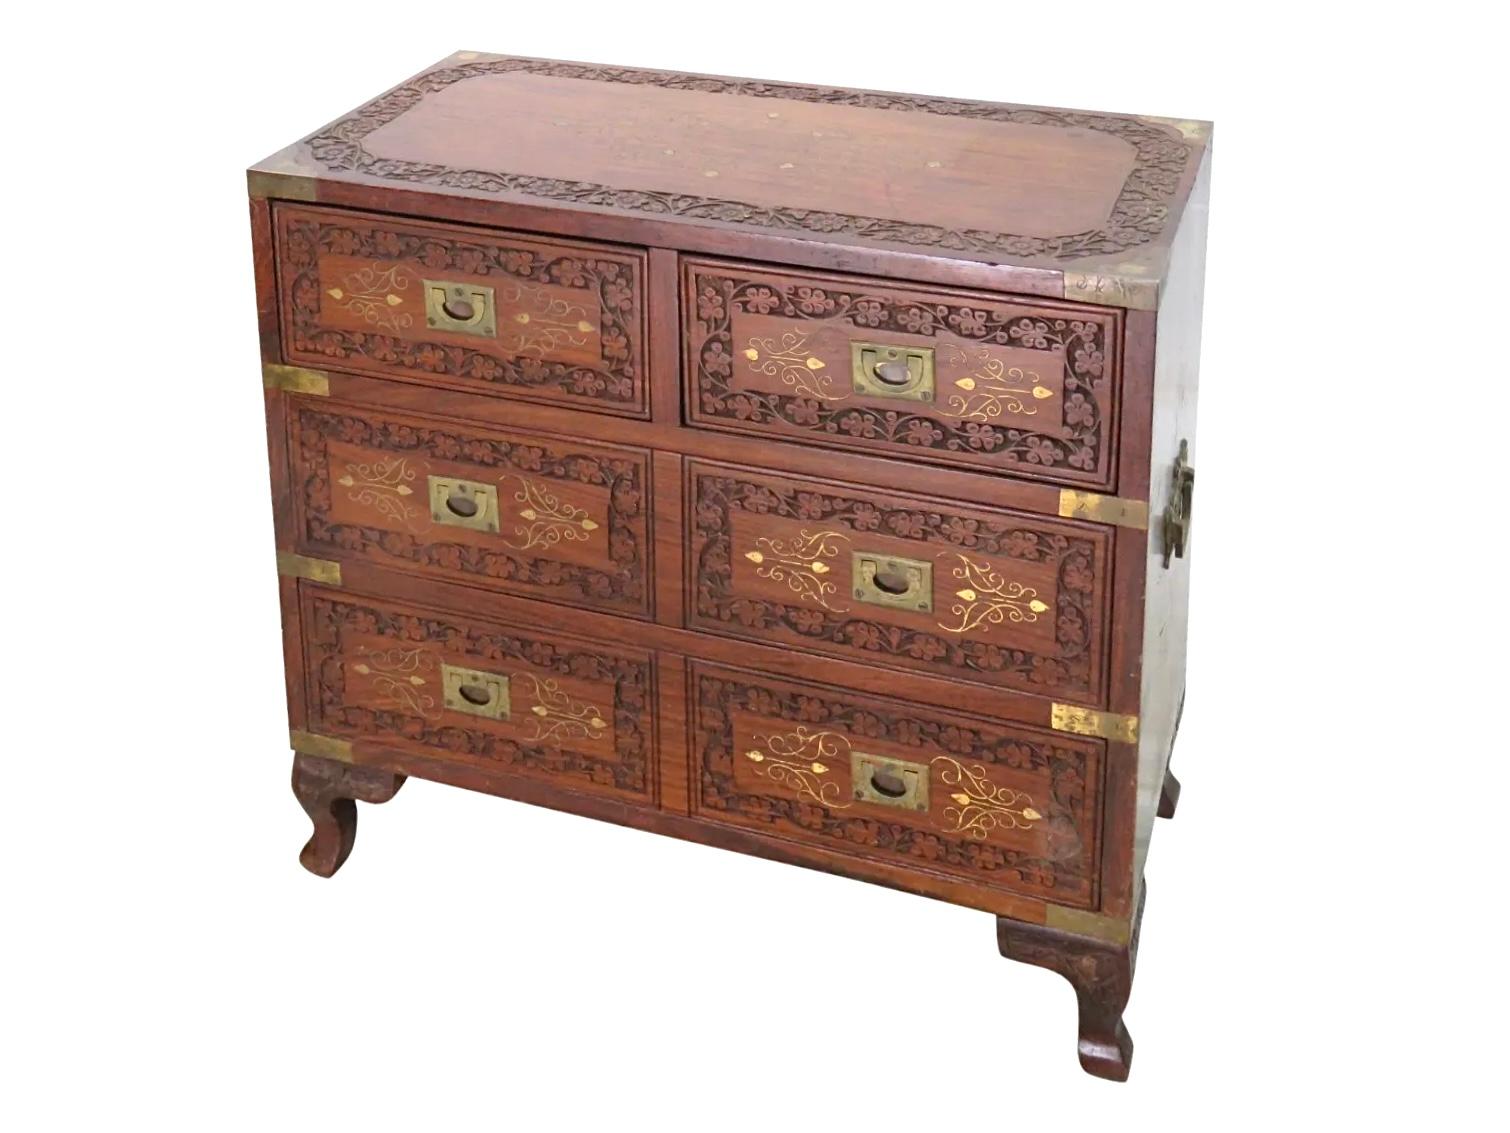 Carved campaign style brass inlaid chest.
Measures: 22.5